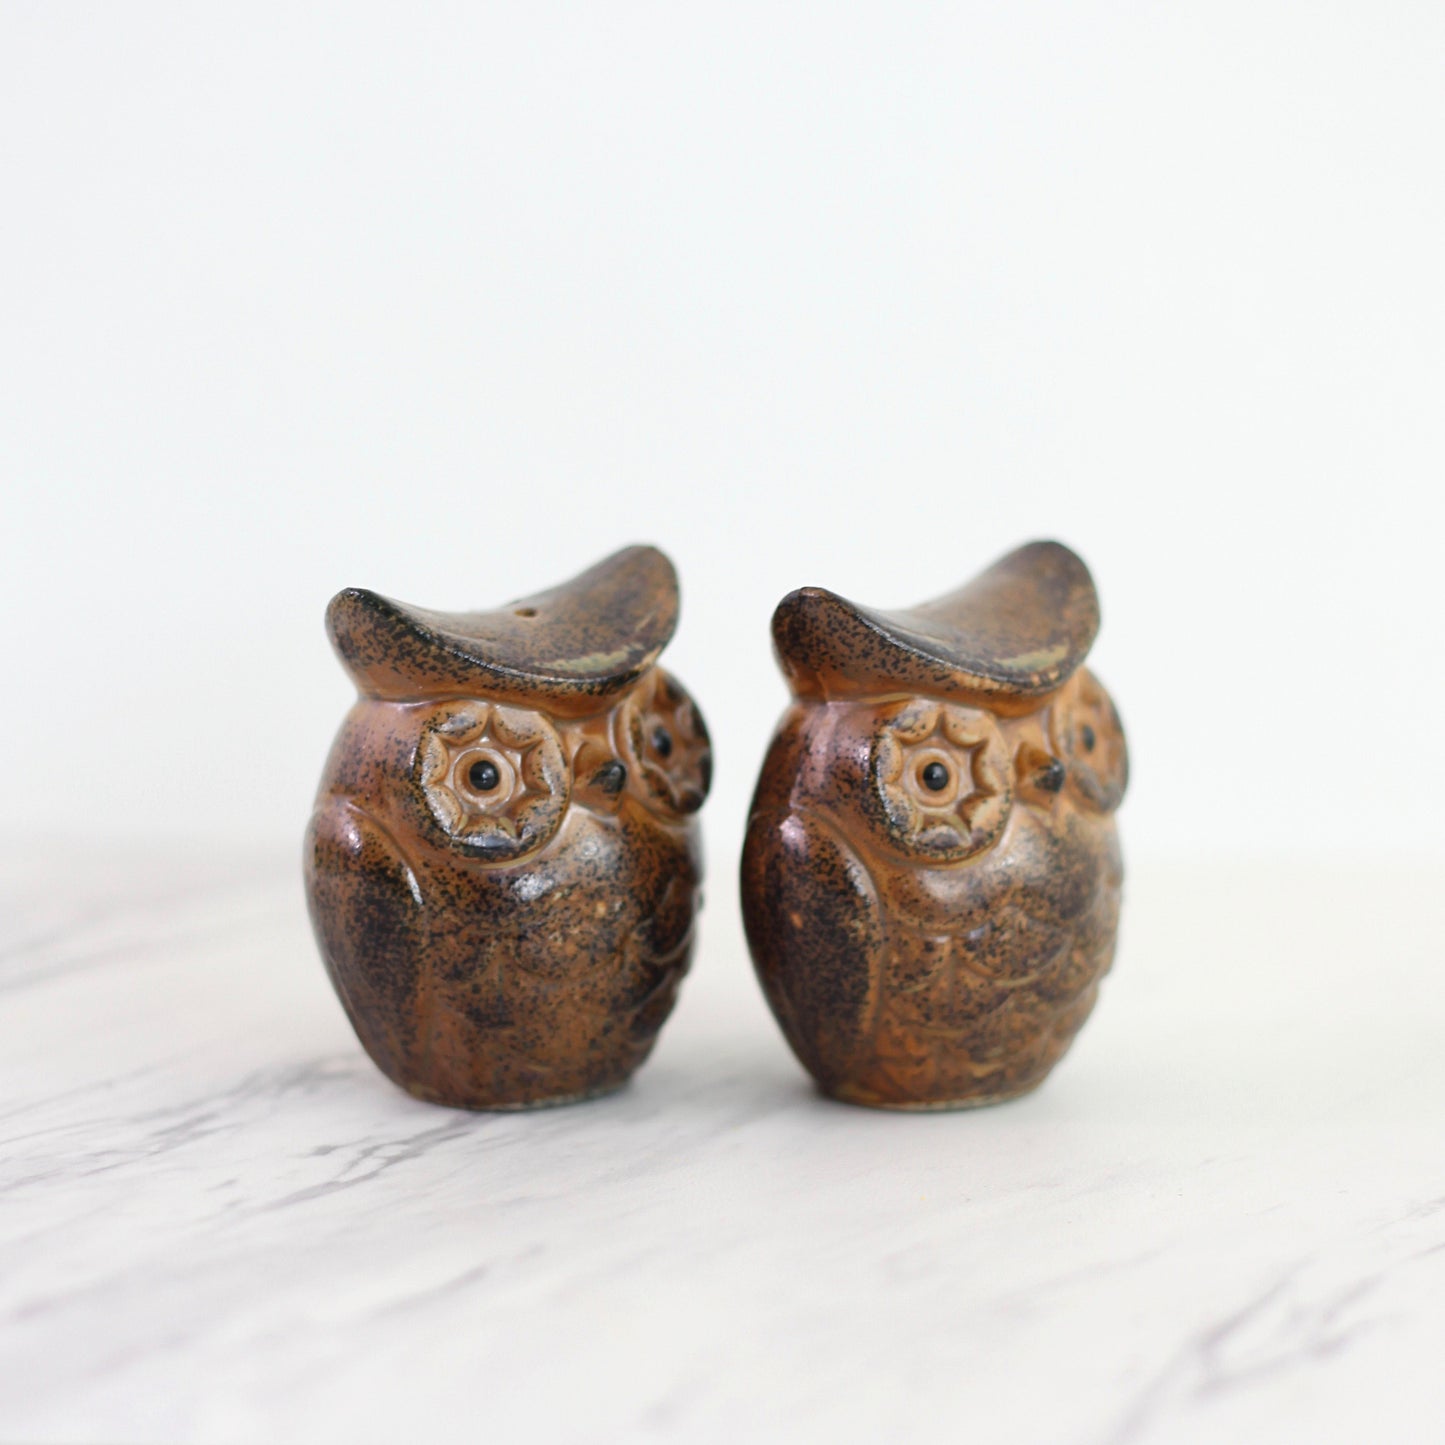 SOLD - Vintage Stoneware Owl Salt and Pepper Shakers